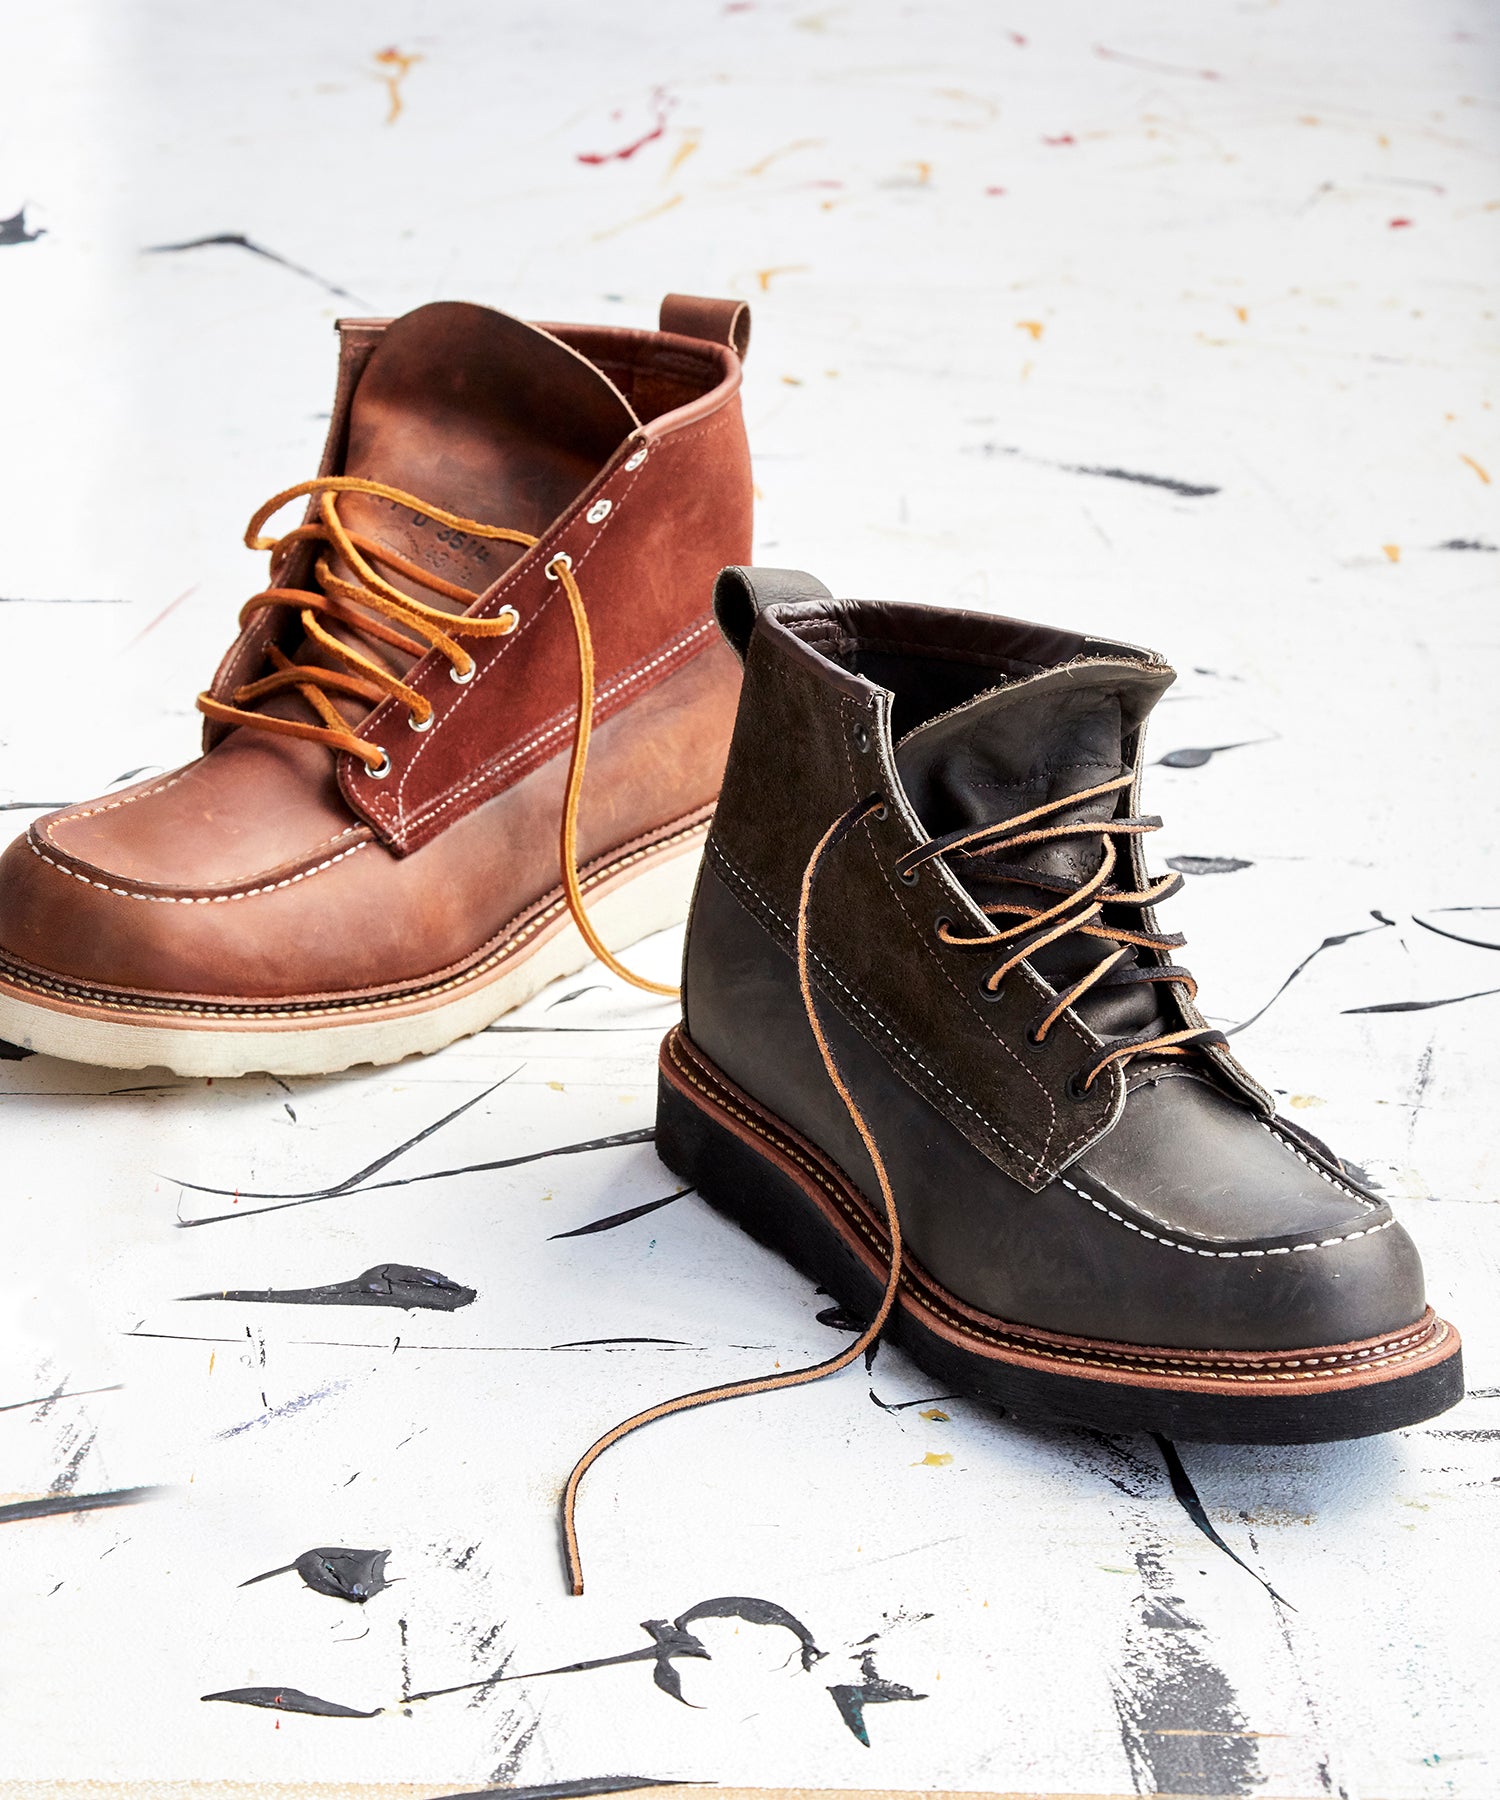 red wing boots lightweight